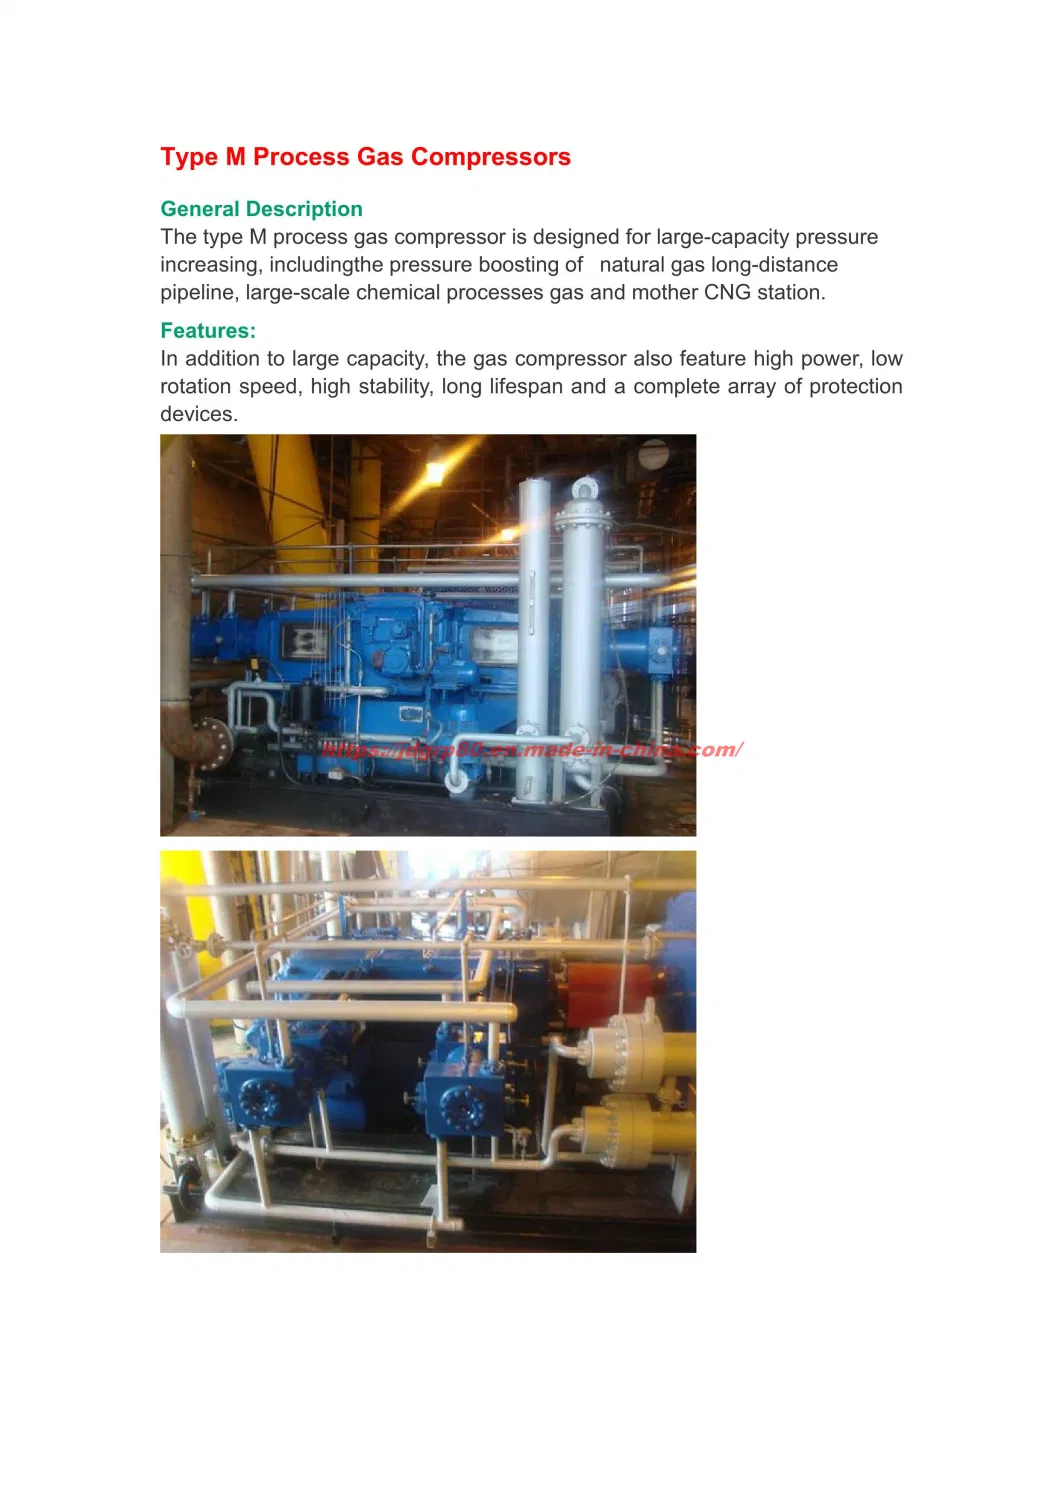 Natural Gas/Biogas Booster Gas Purification Station Mother/Daughter Compressing Station LNG/CNG/L-CNG Refueling Station